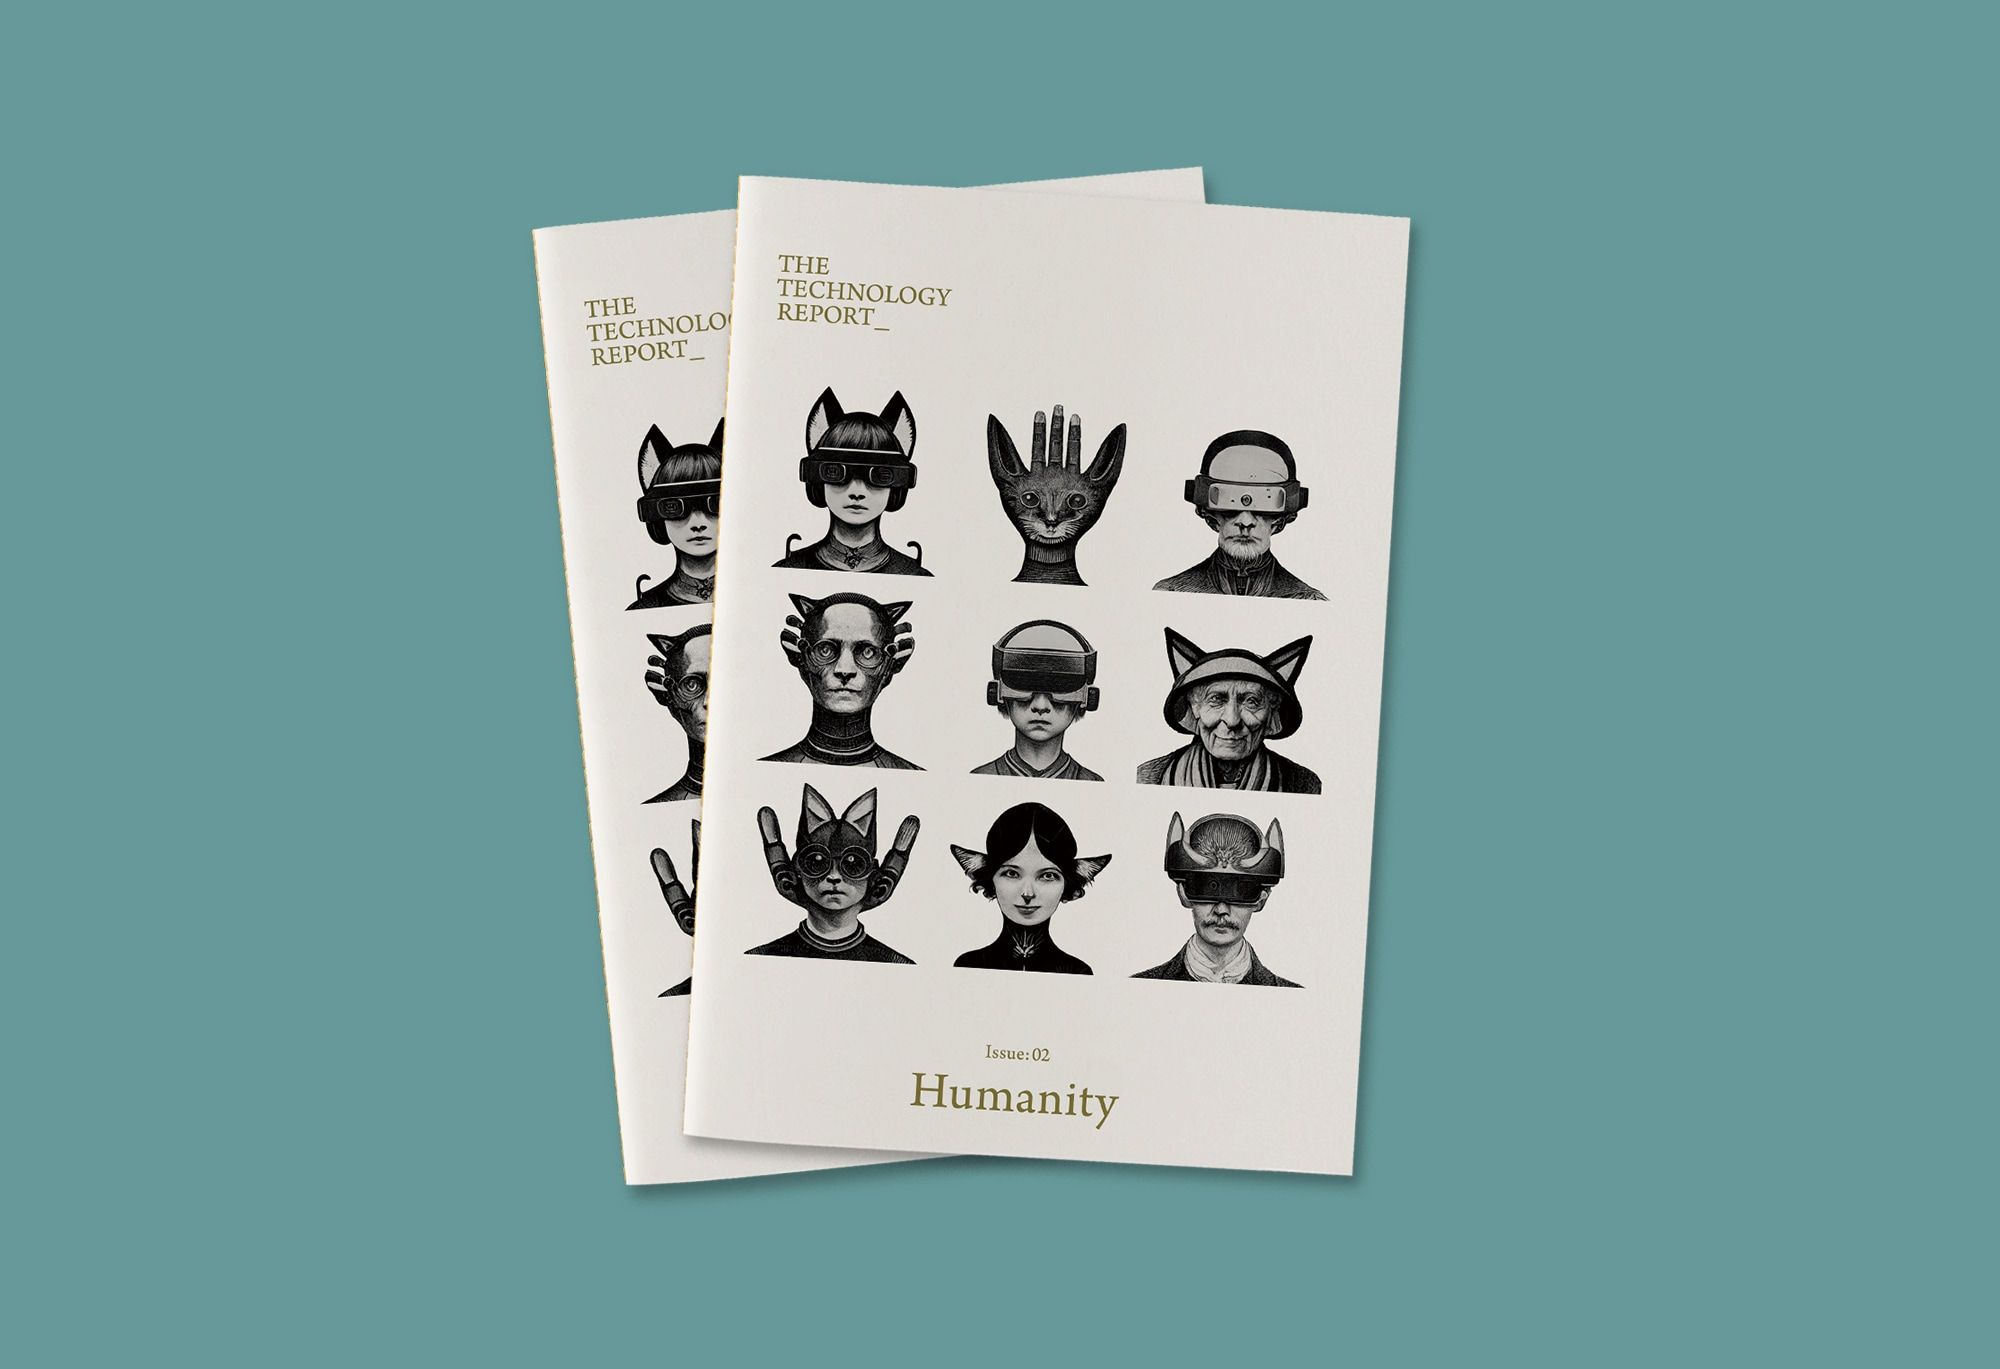 Issue:02 “Humanity”